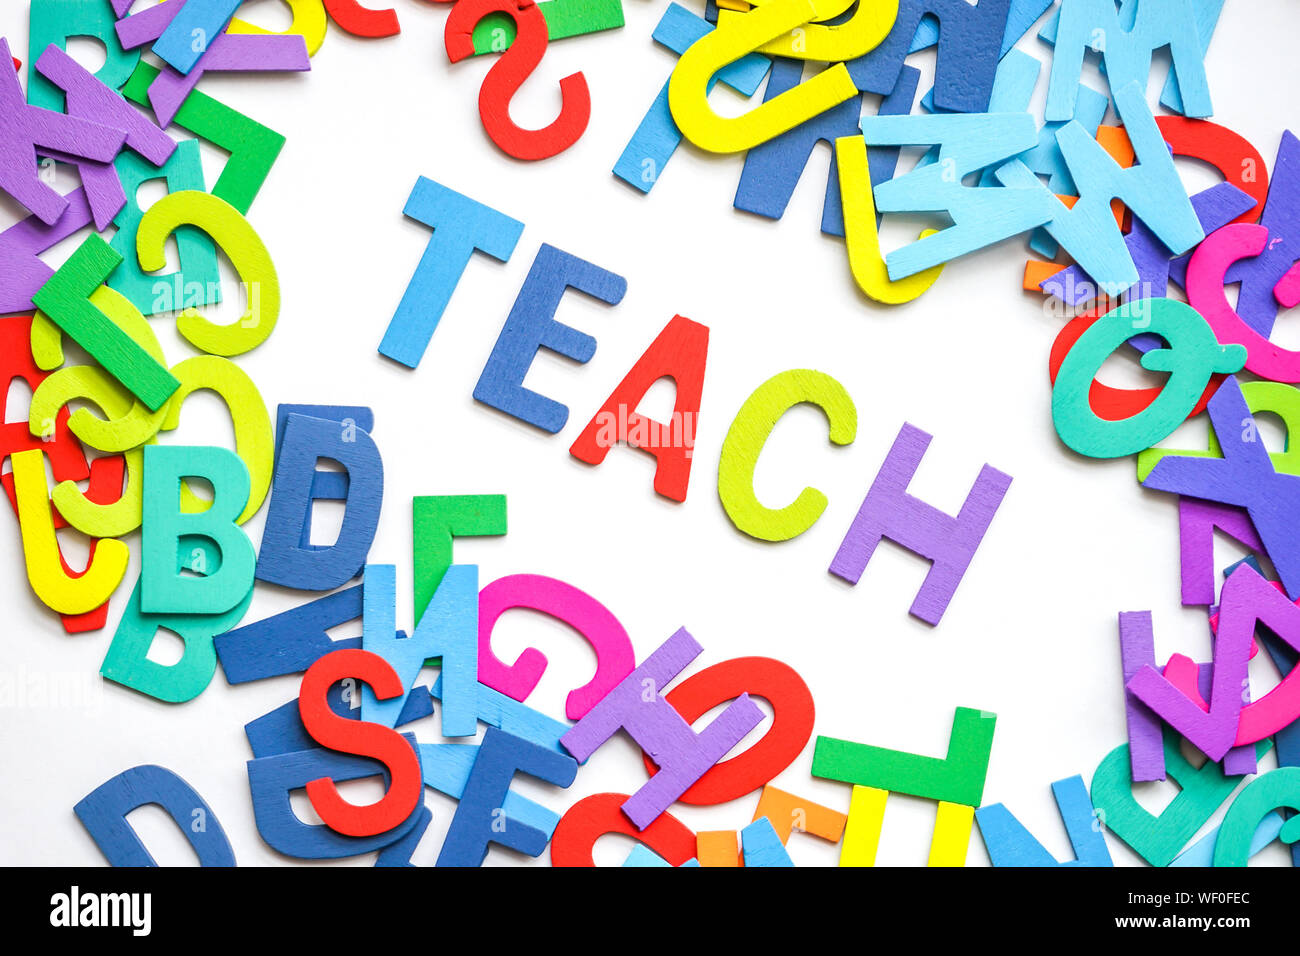 Teach Text With Colorful Alphabets On White Background Stock Photo